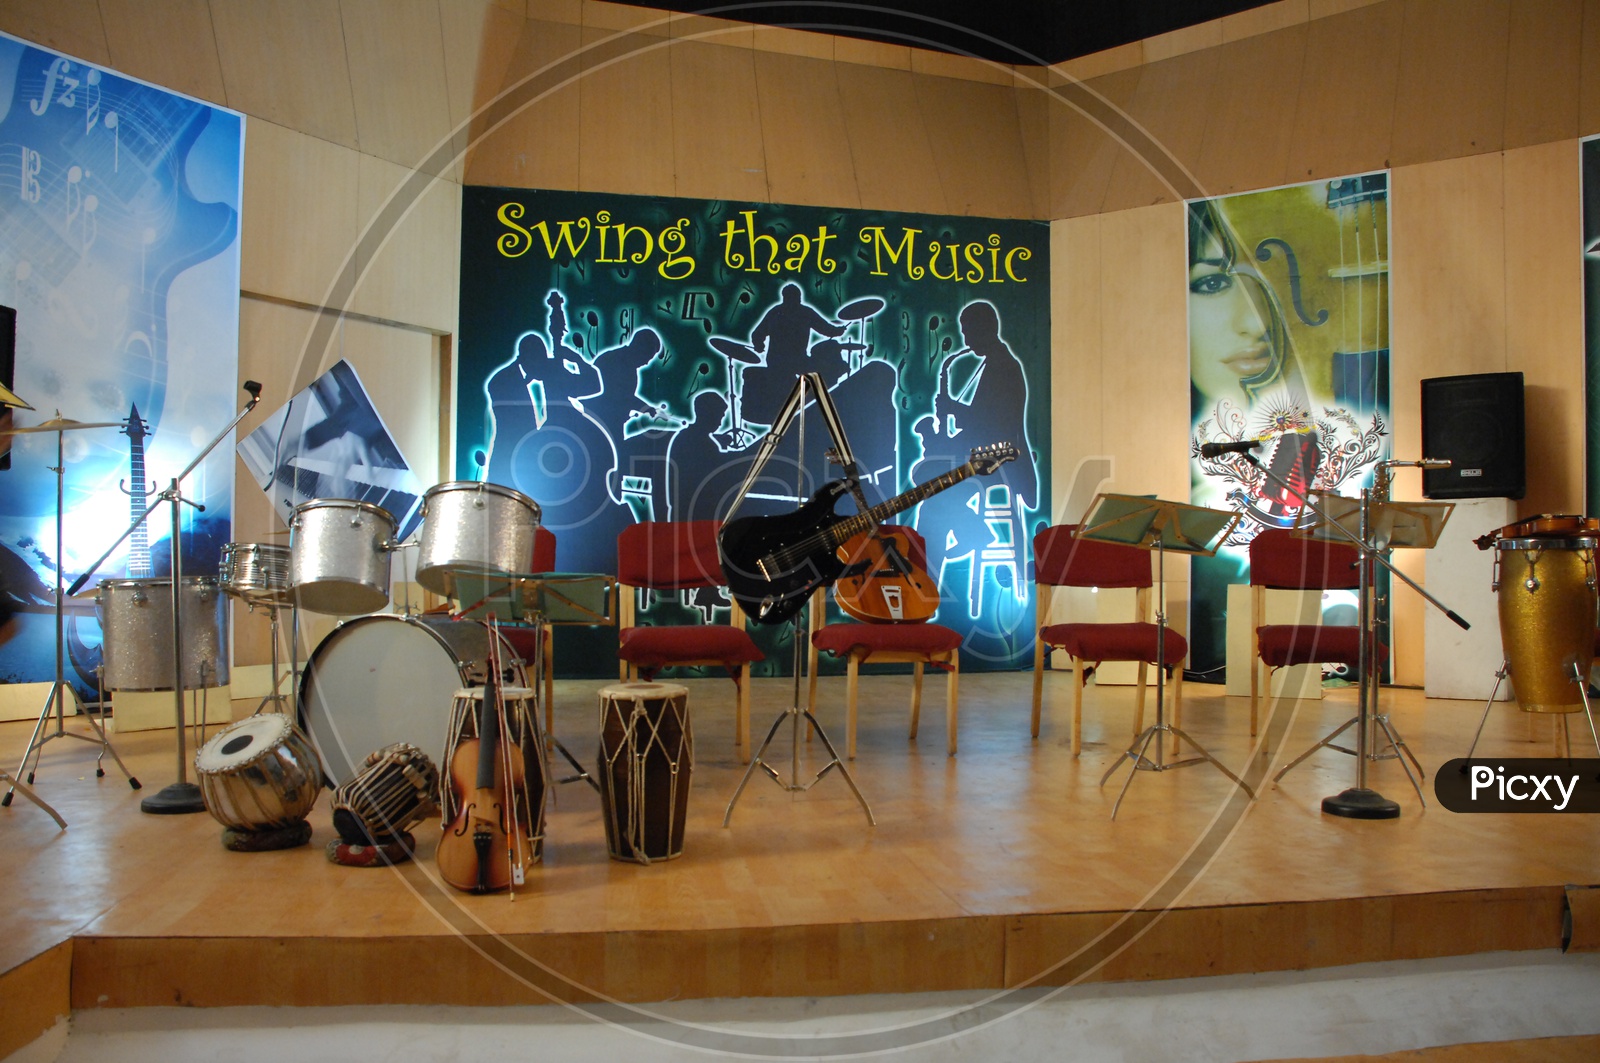 Music Band Instruments on a Stage